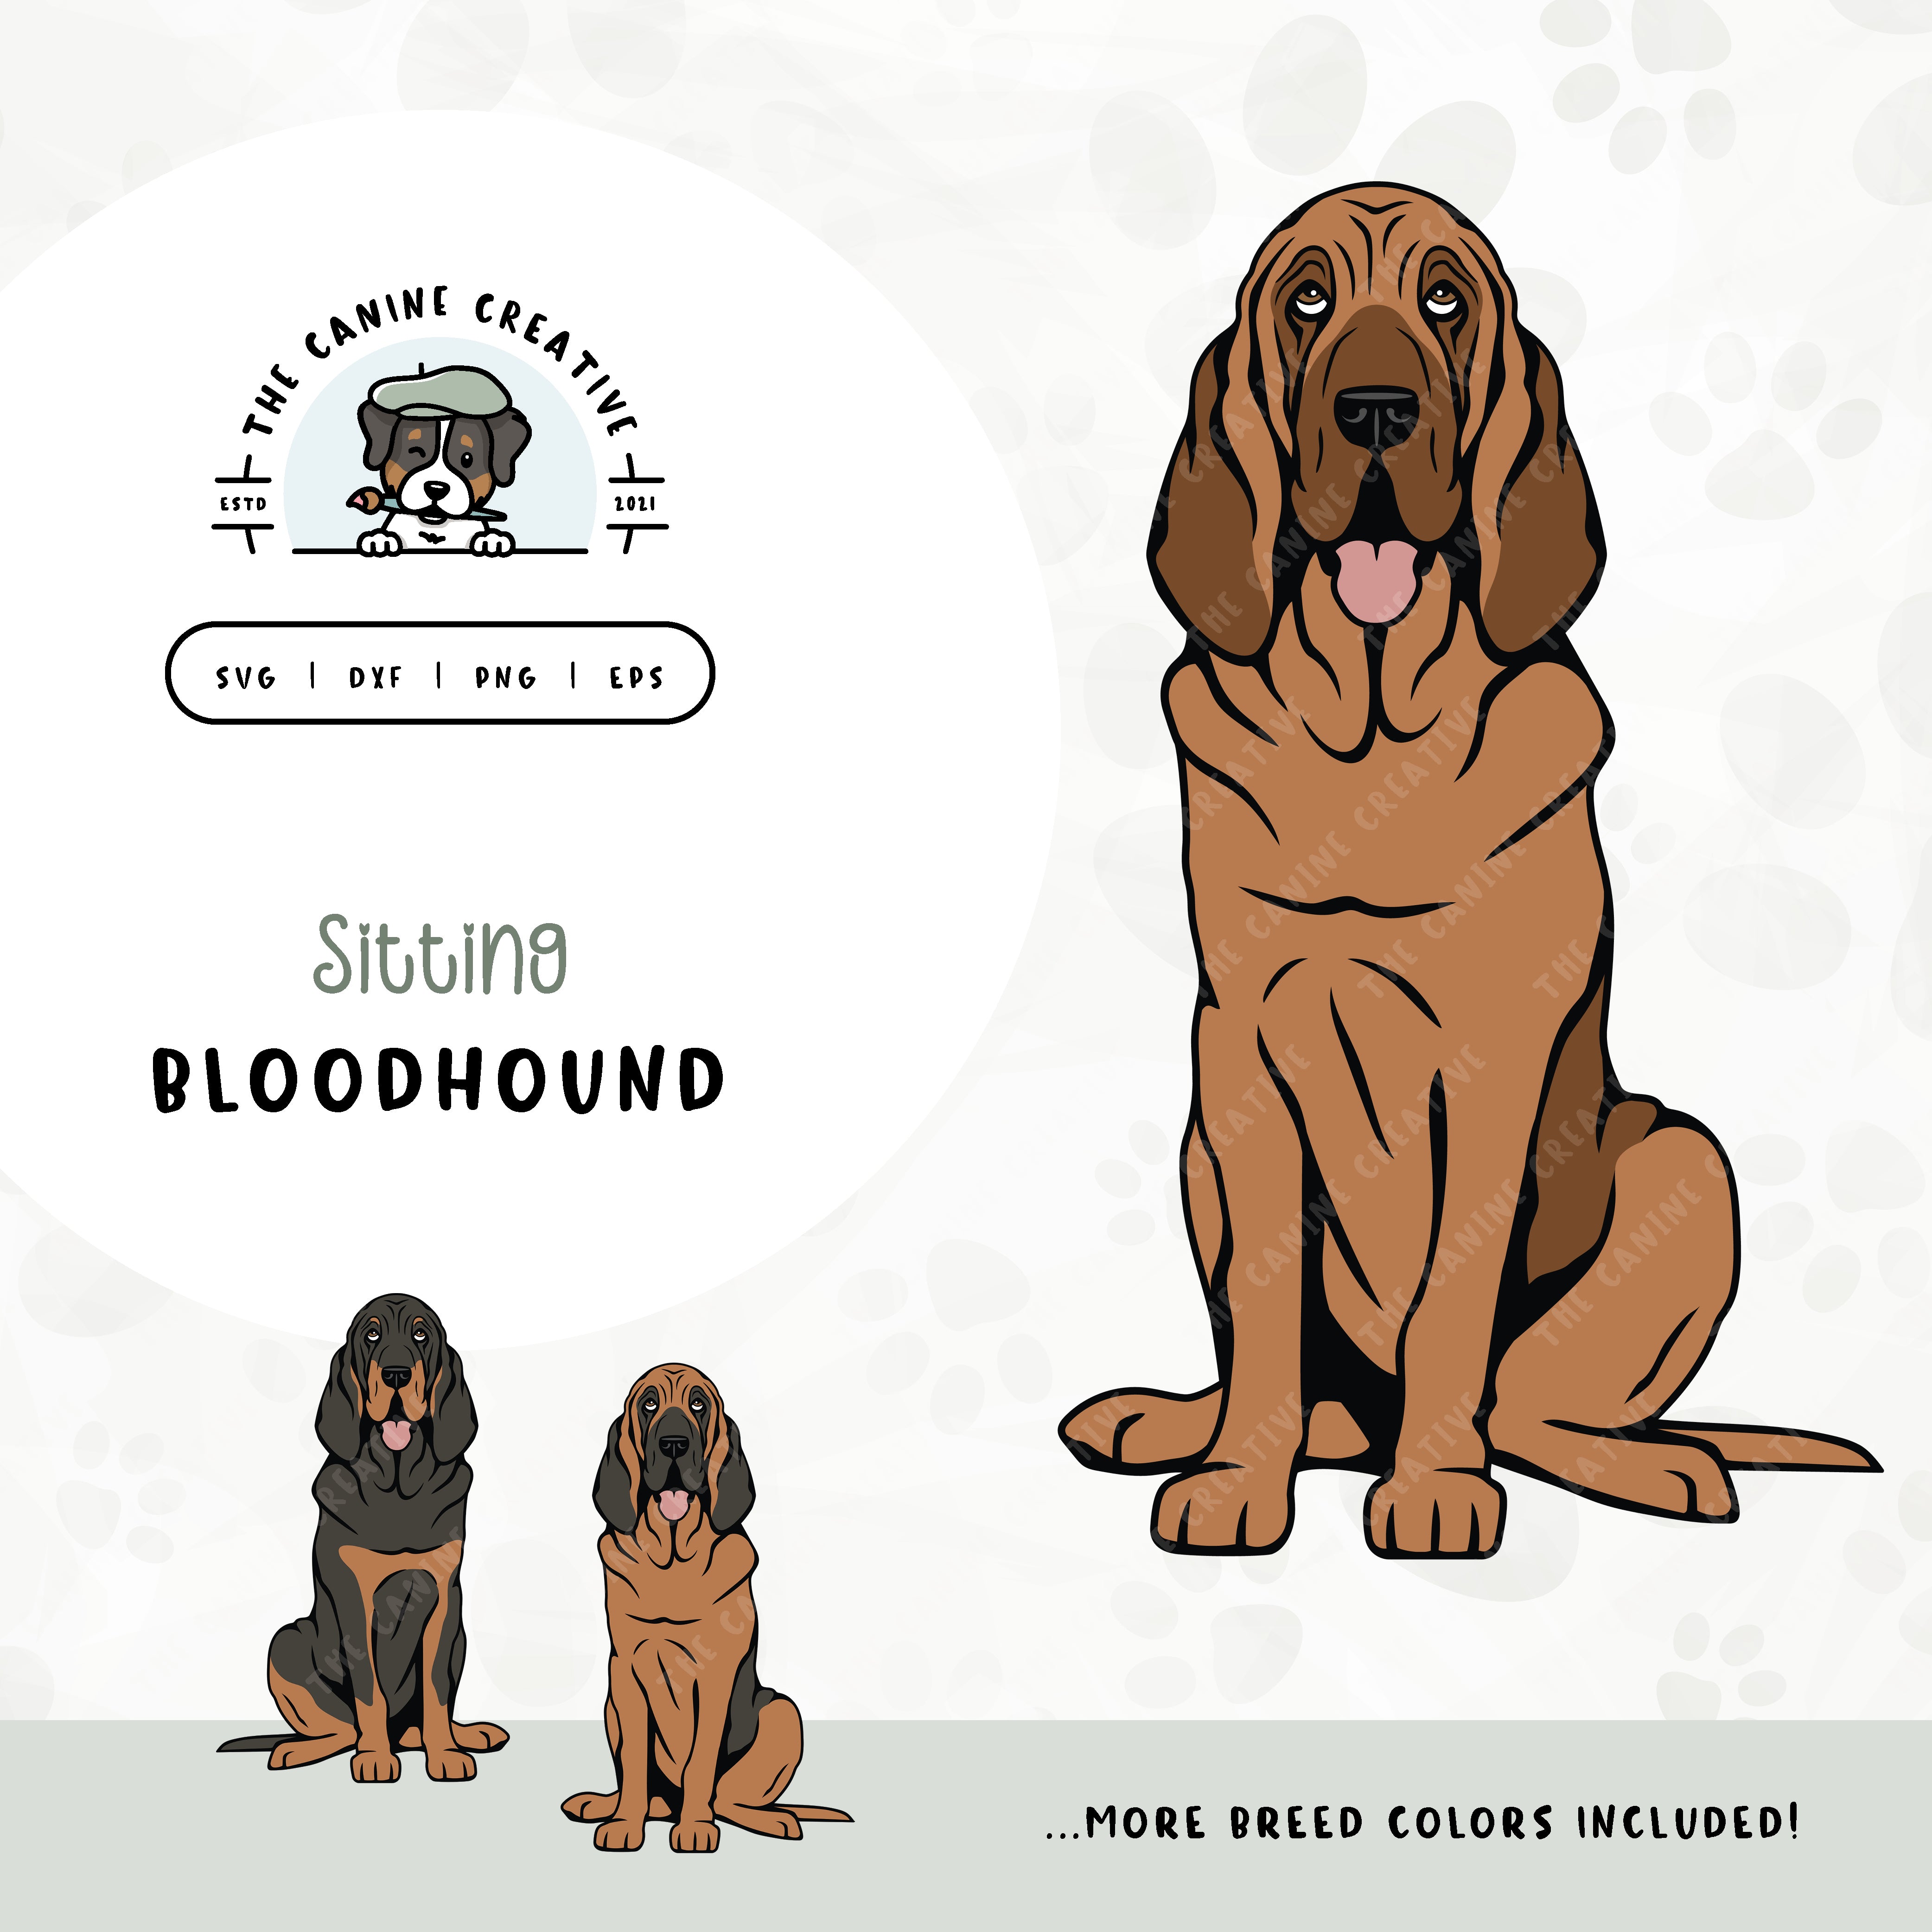 This sitting dog design features a Bloodhound. File formats include: SVG, DXF, PNG, and EPS.